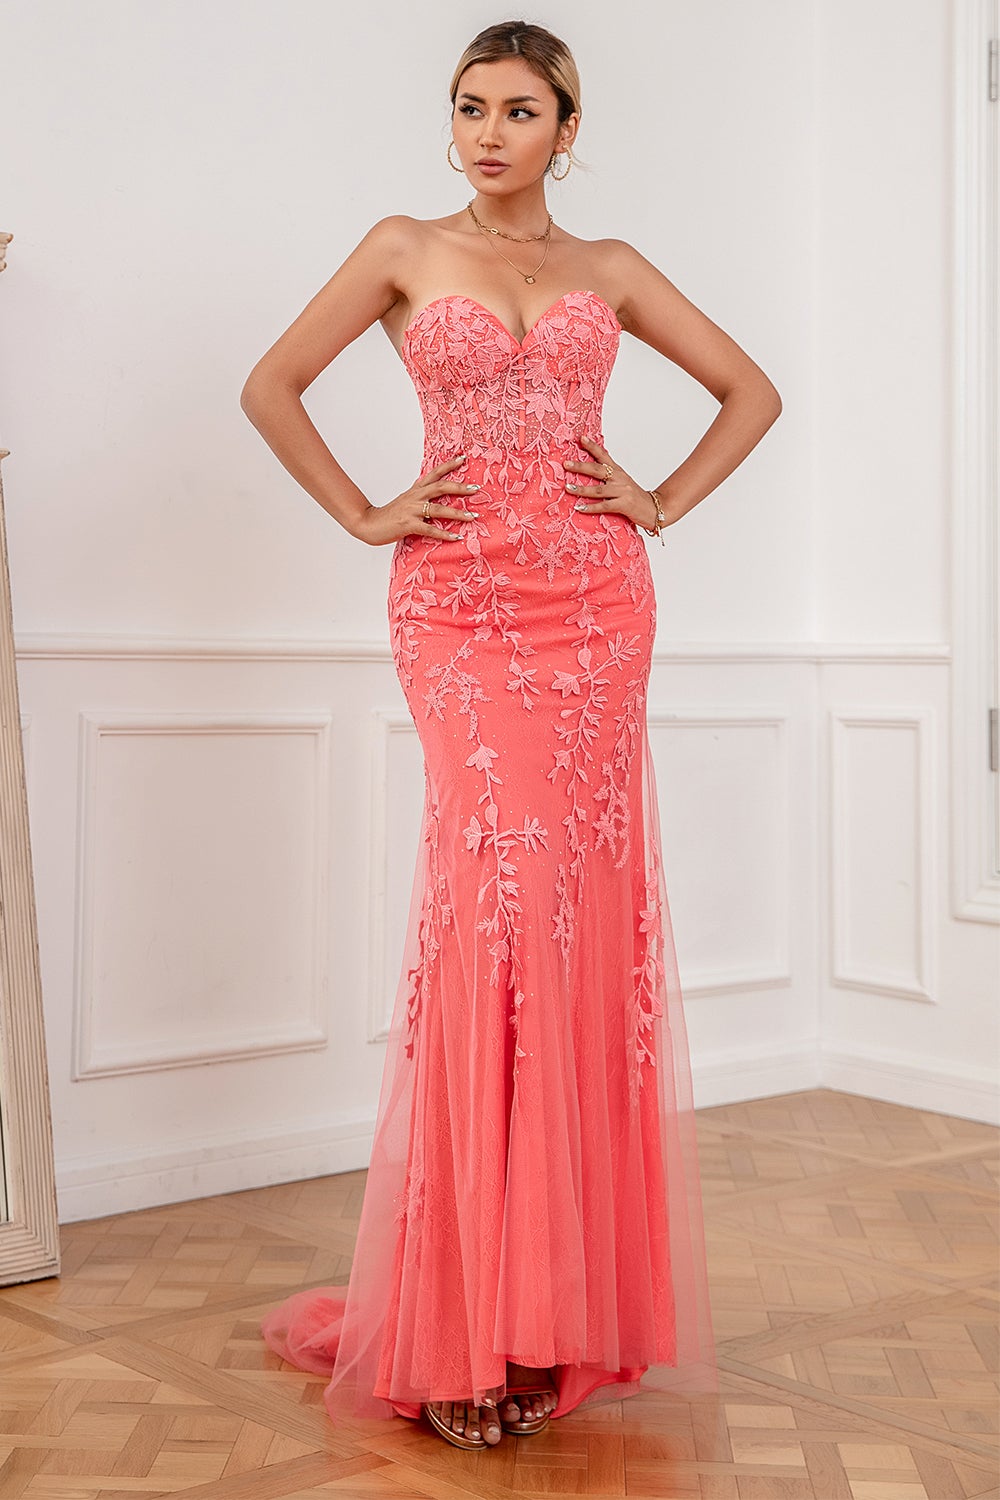 Strapless Coral Appliqued Tulle Long Ball Dress